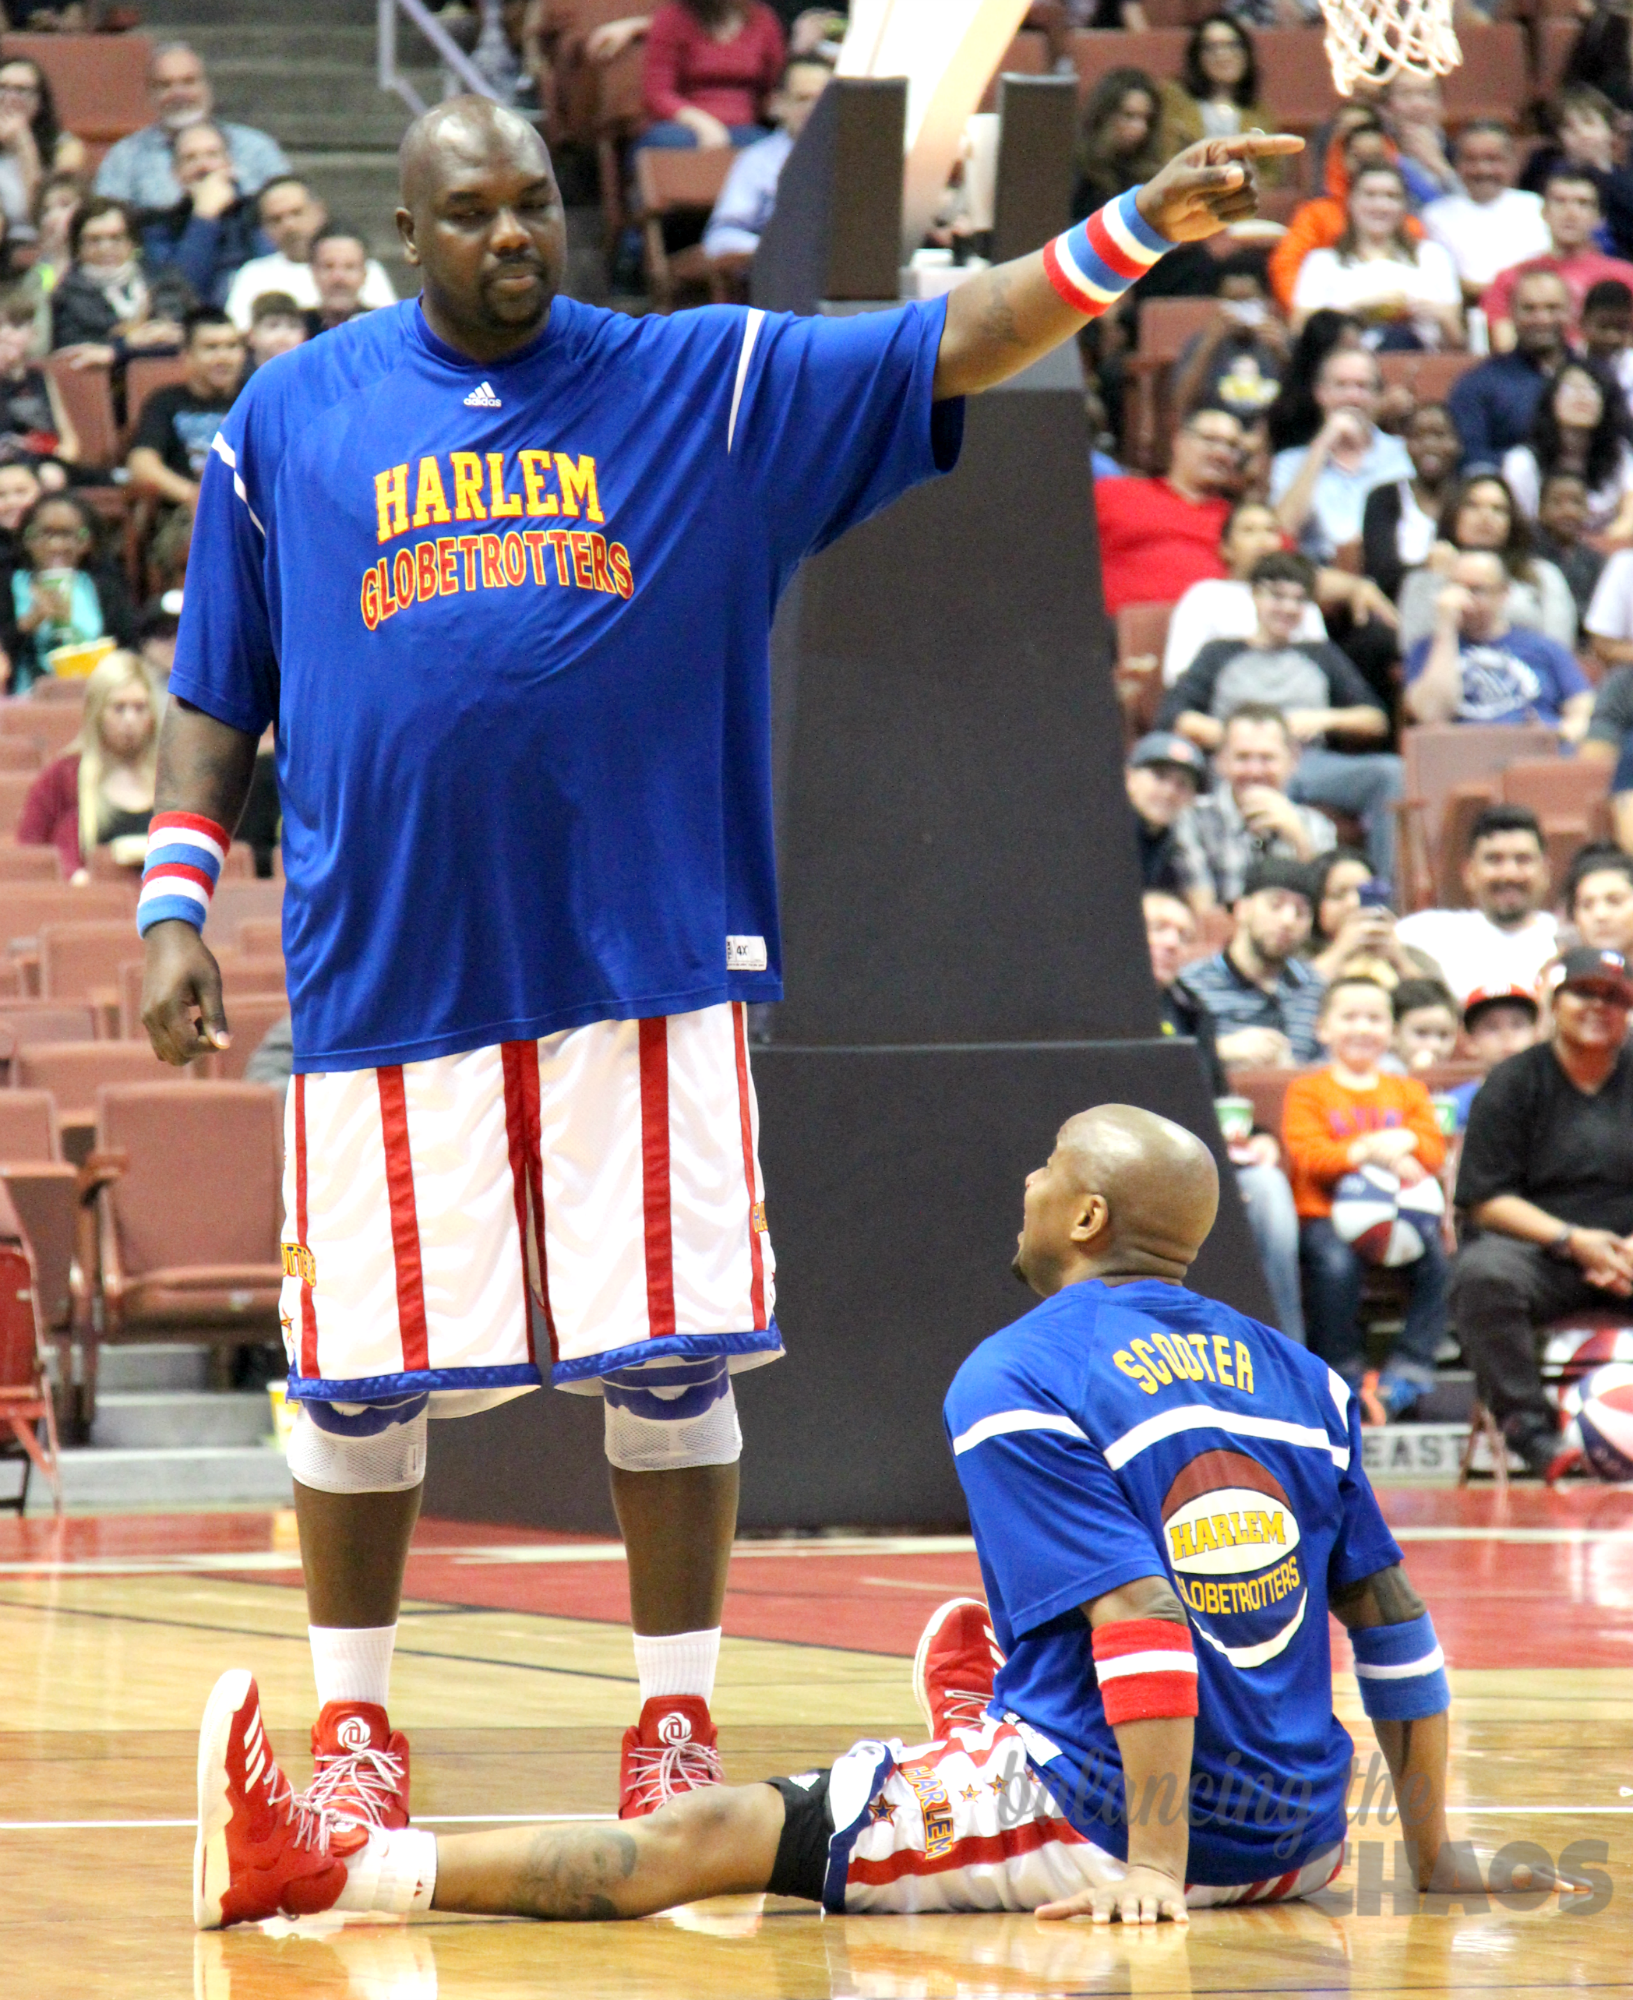 Harlem Globetrotters Big Easy and Scooter